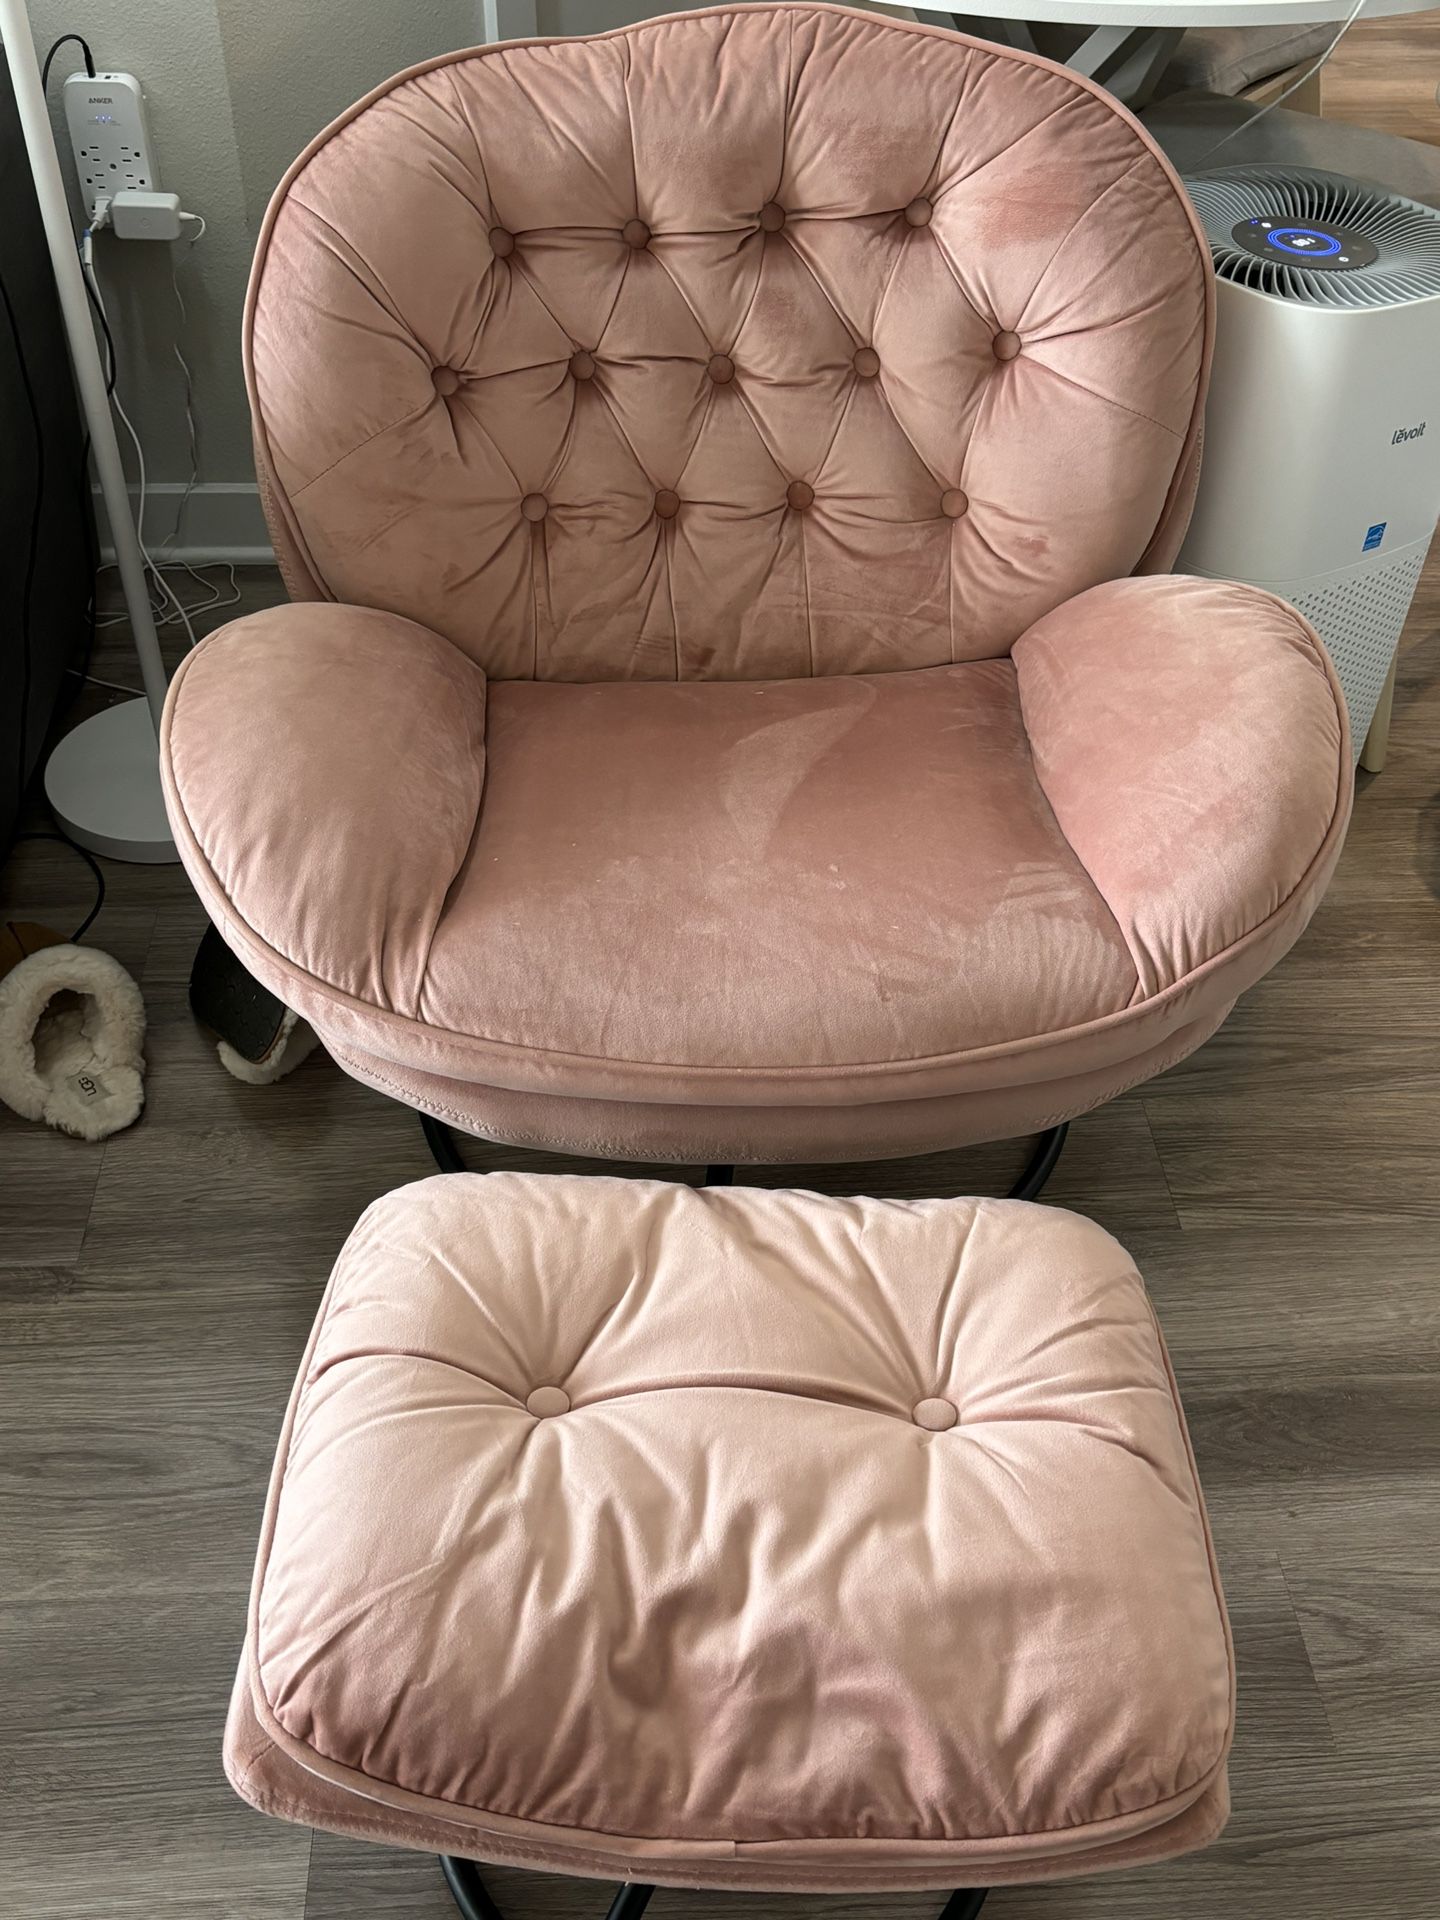 Pink chair with Footrest